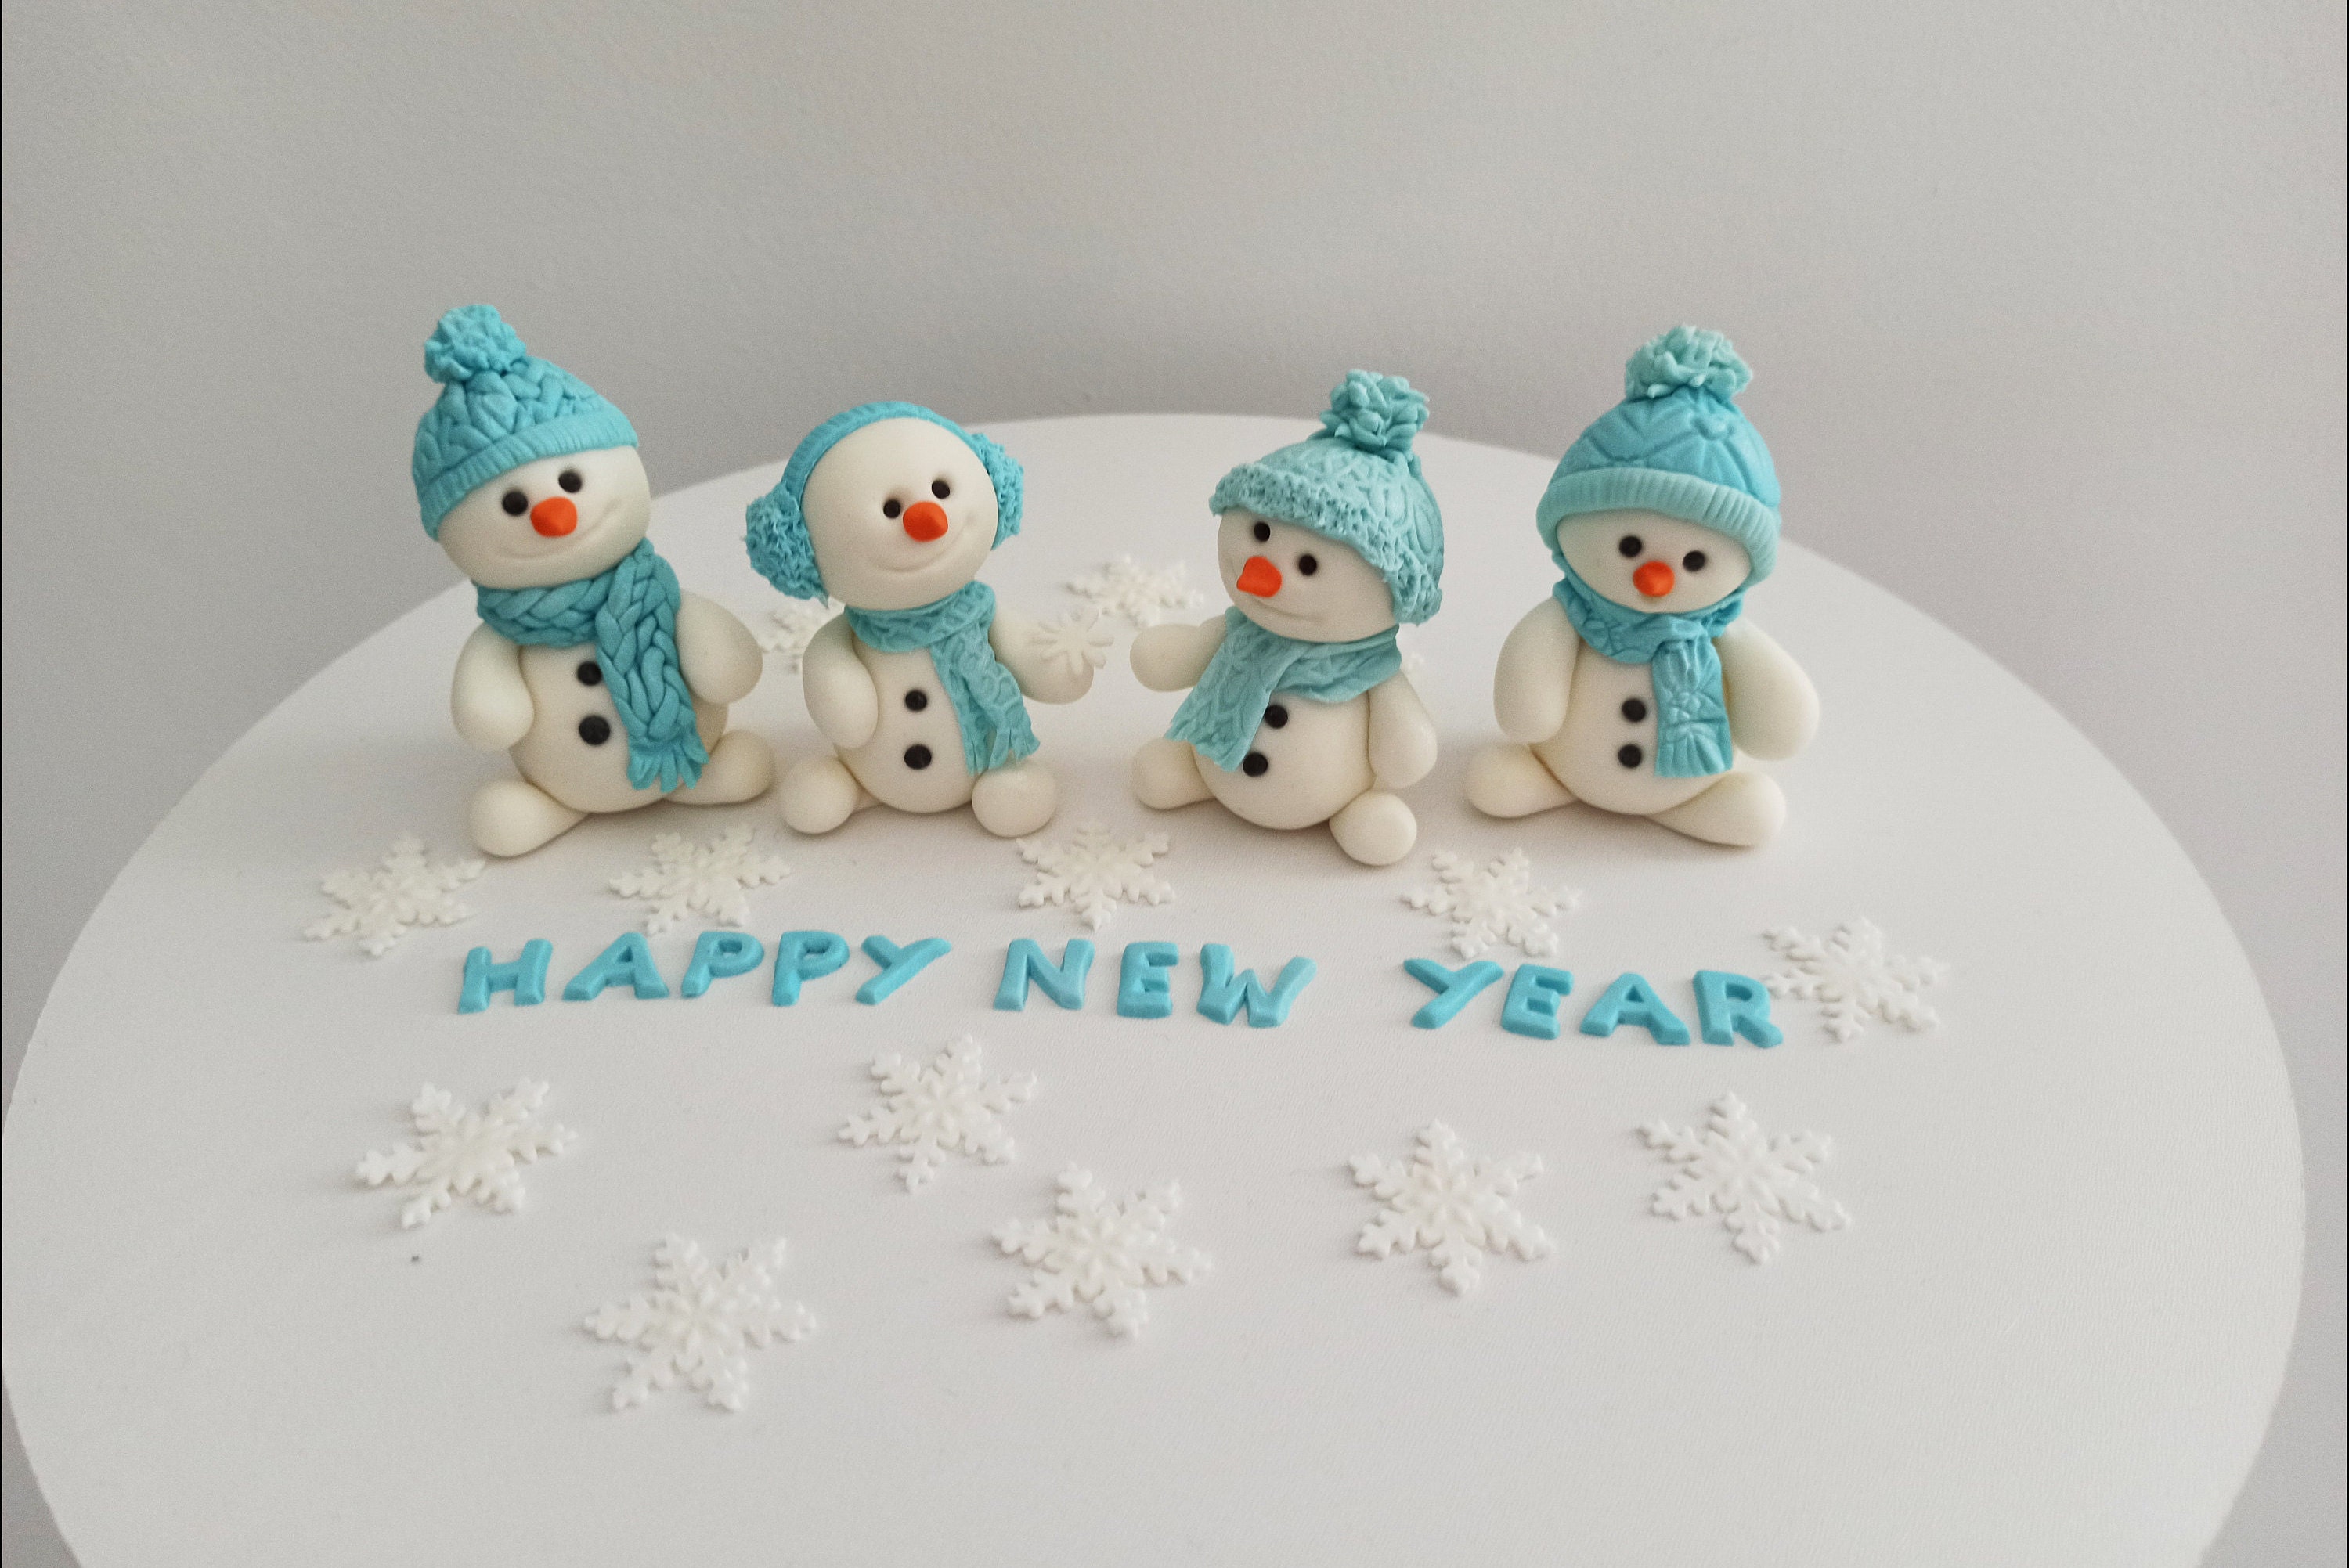 WINTER SNOWMAN & SNOWFLAKE CAKE PAN The mini cakes you make in our Winter  Snowman & Snowflake Cake Pan will look impressive, but you'll know they're  impressive…